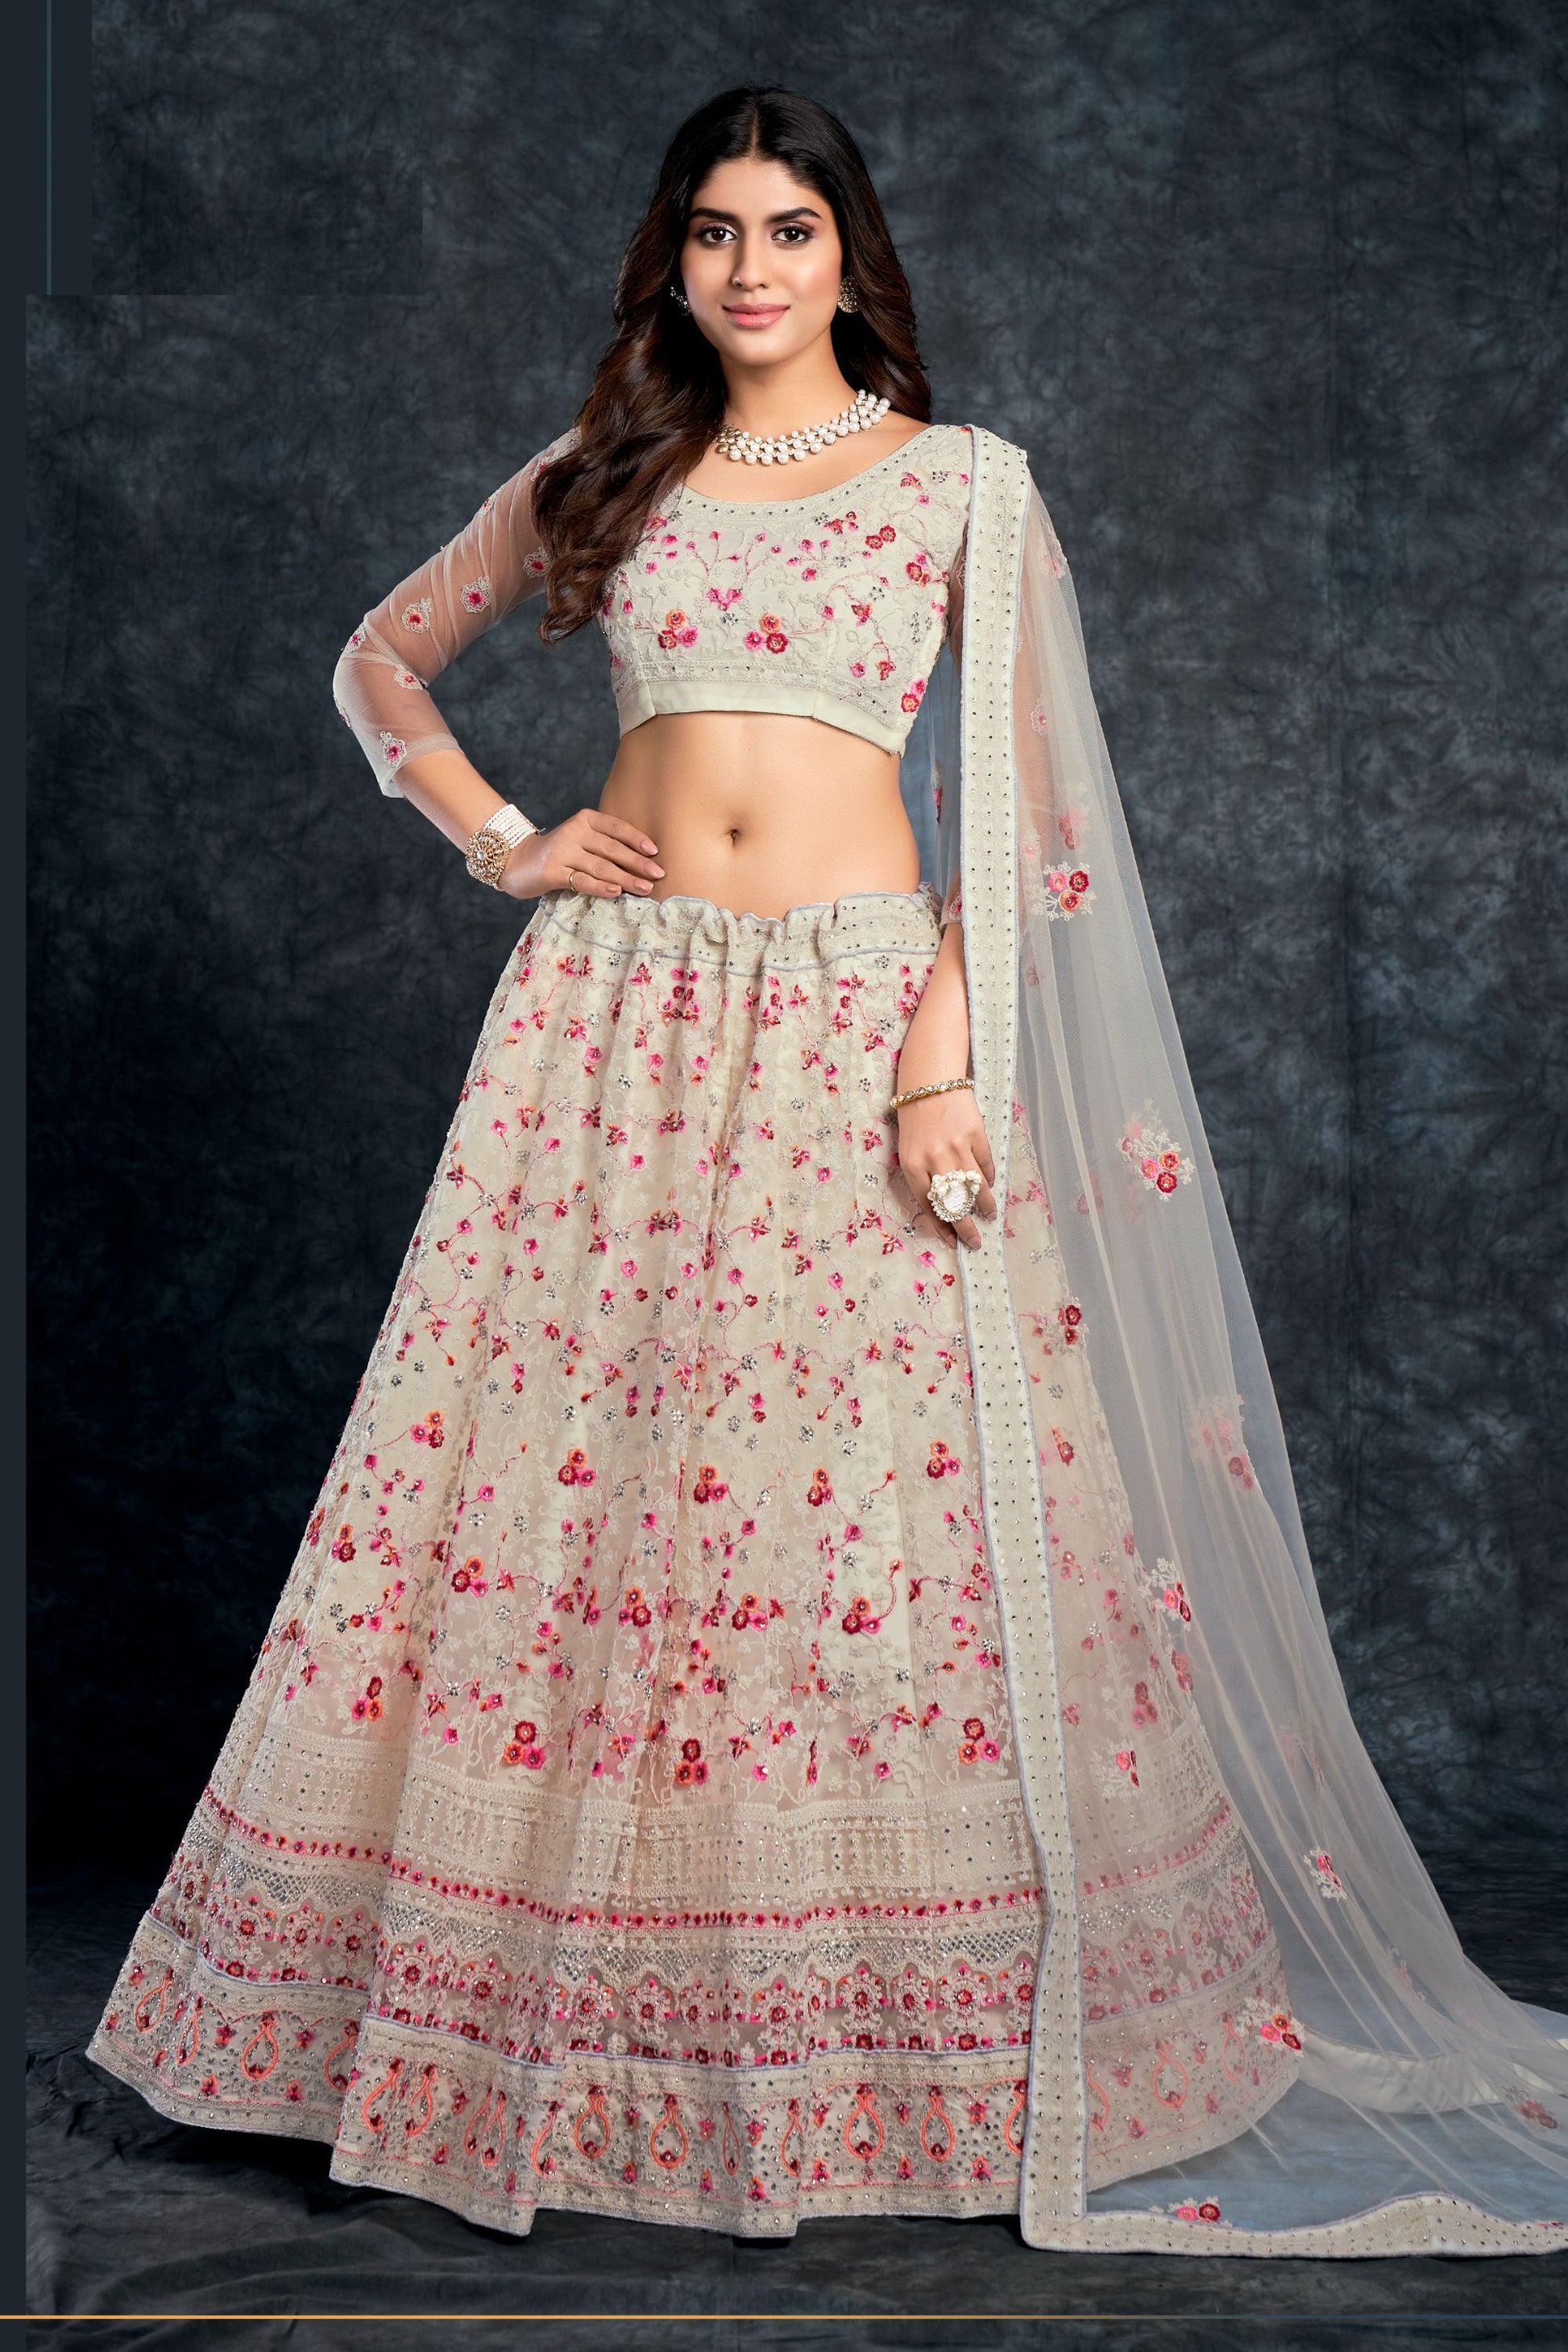 White Indian Silk Floral Embroidered Lehenga Choli For Indian Festivals & Weddings - Sequence Embroidery Work, Thread Work, Stone Work, Zari Work